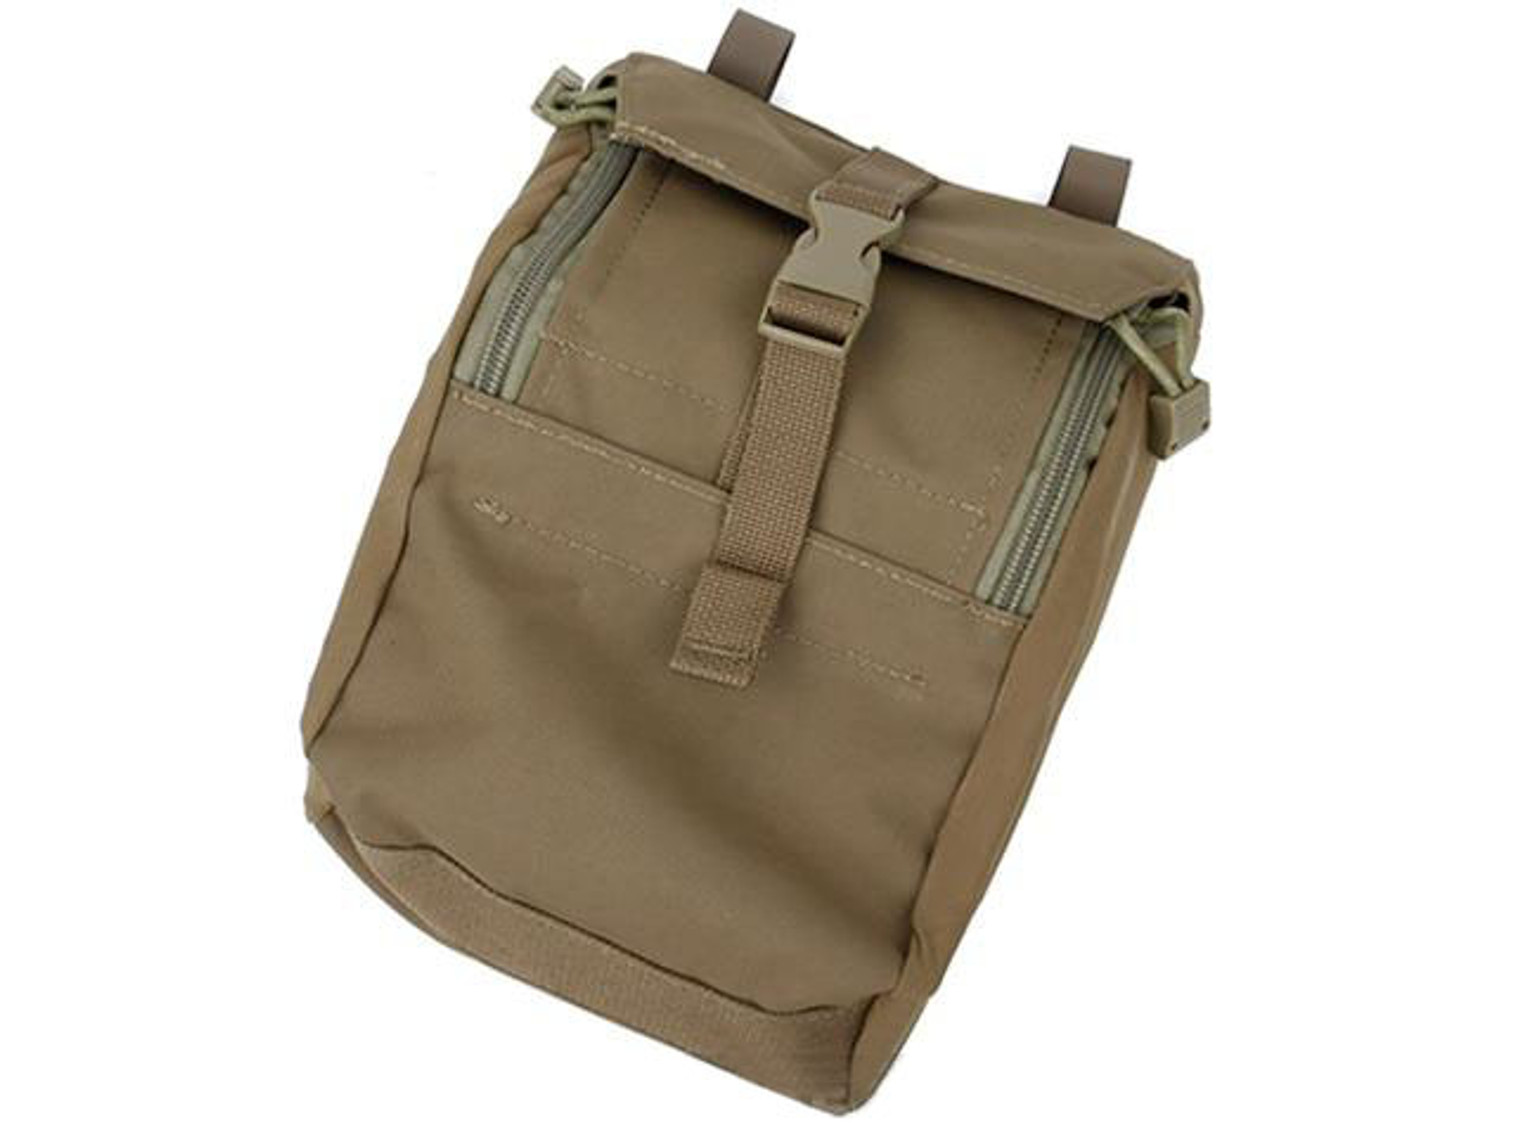 TMC 973 General Purpose MOLLE Pouch - Coyote Brown